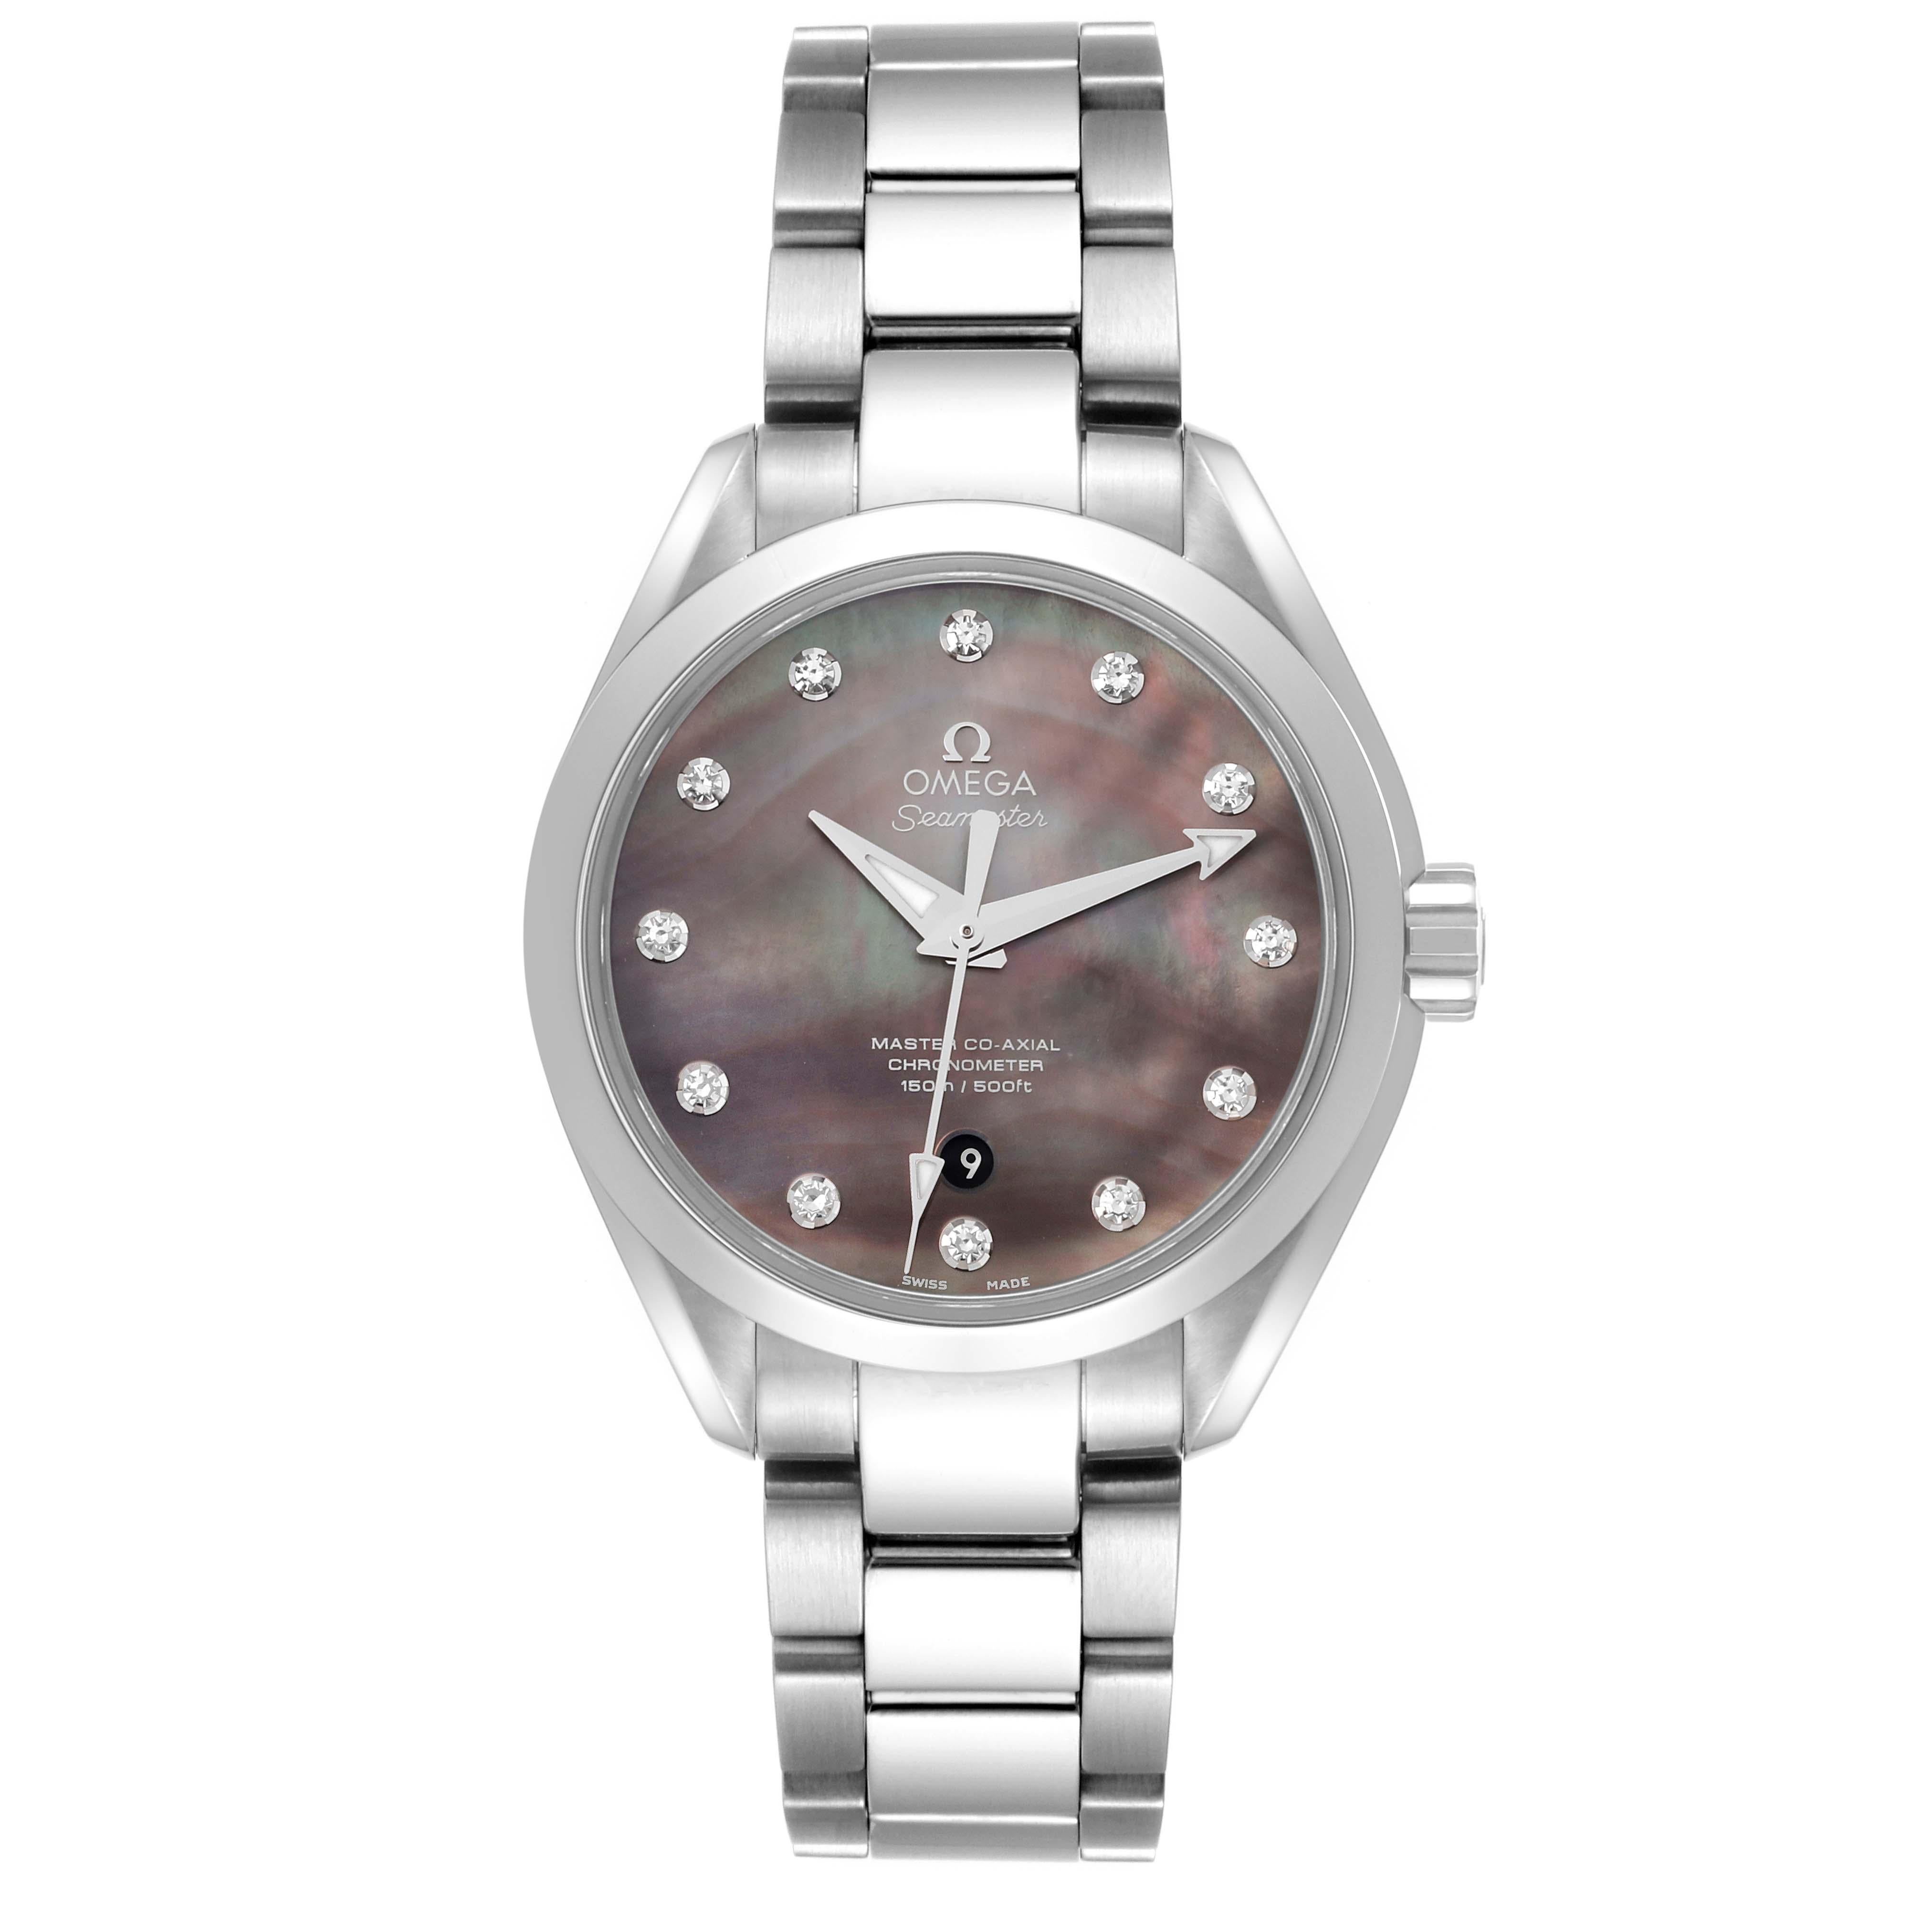 Omega Aqua Terra 34 MOP Diamond Ladies Watch 231.10.34.20.57.001 Unworn. Automatic self-winding movement. . Stainless steel round case 34 mm in diameter. Exhibition transparent sapphire crystal case back. Stainless steel smooth bezel. Scratch